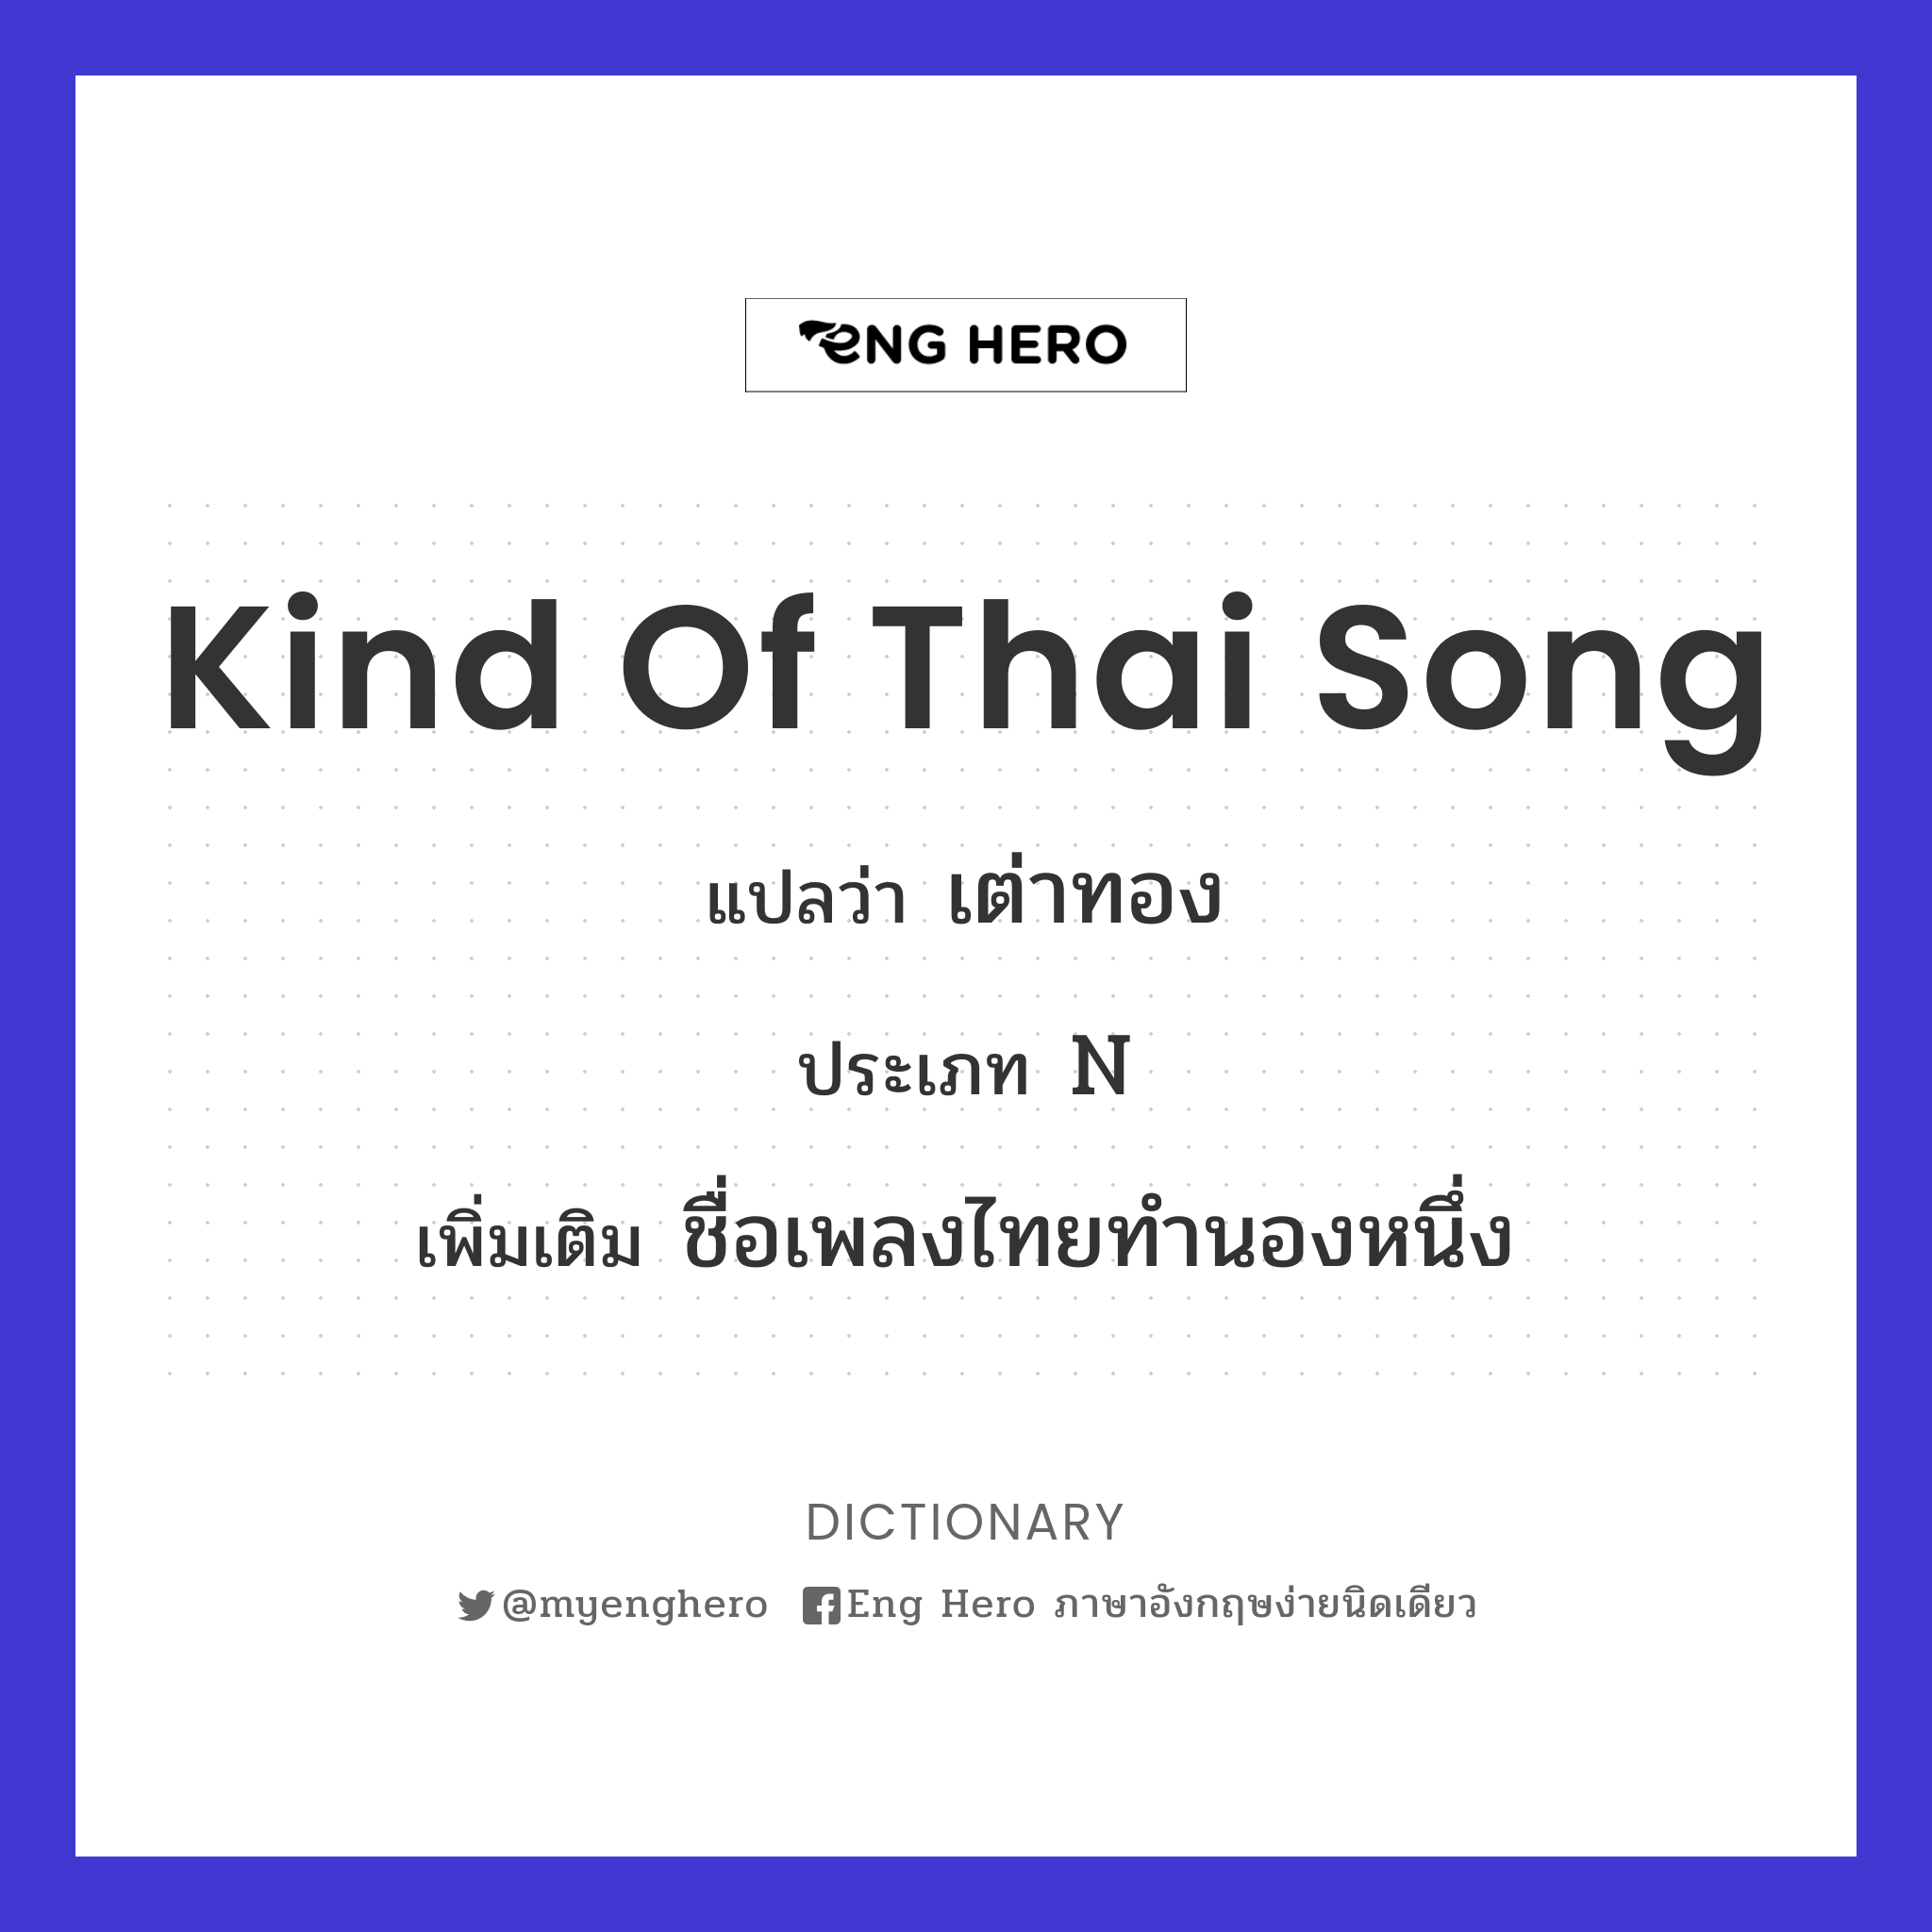 kind of Thai song